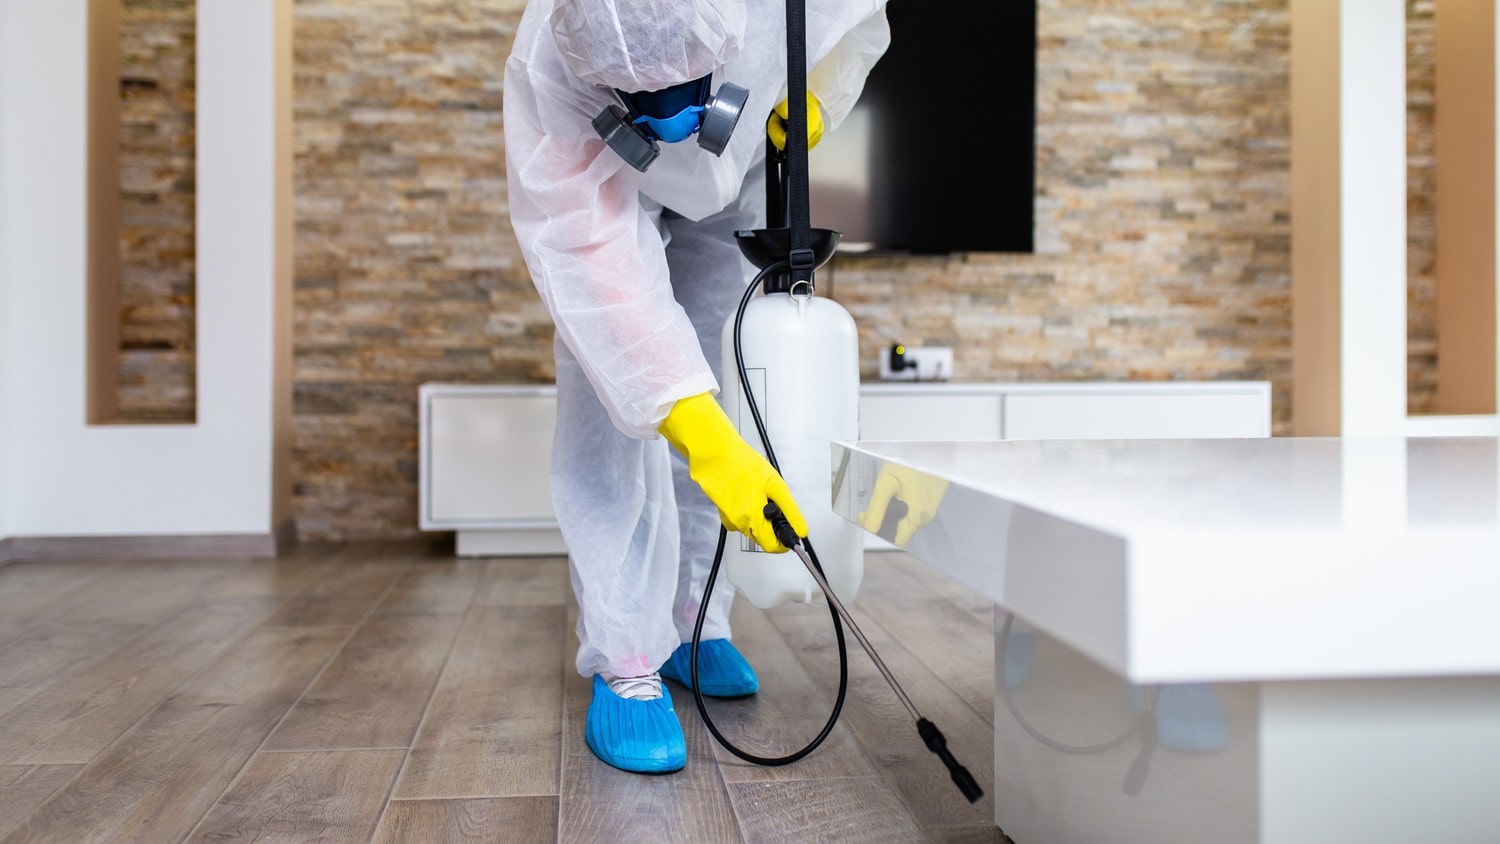 A professional pest control technician wearing protective gear, inspecting a residential area for pests.